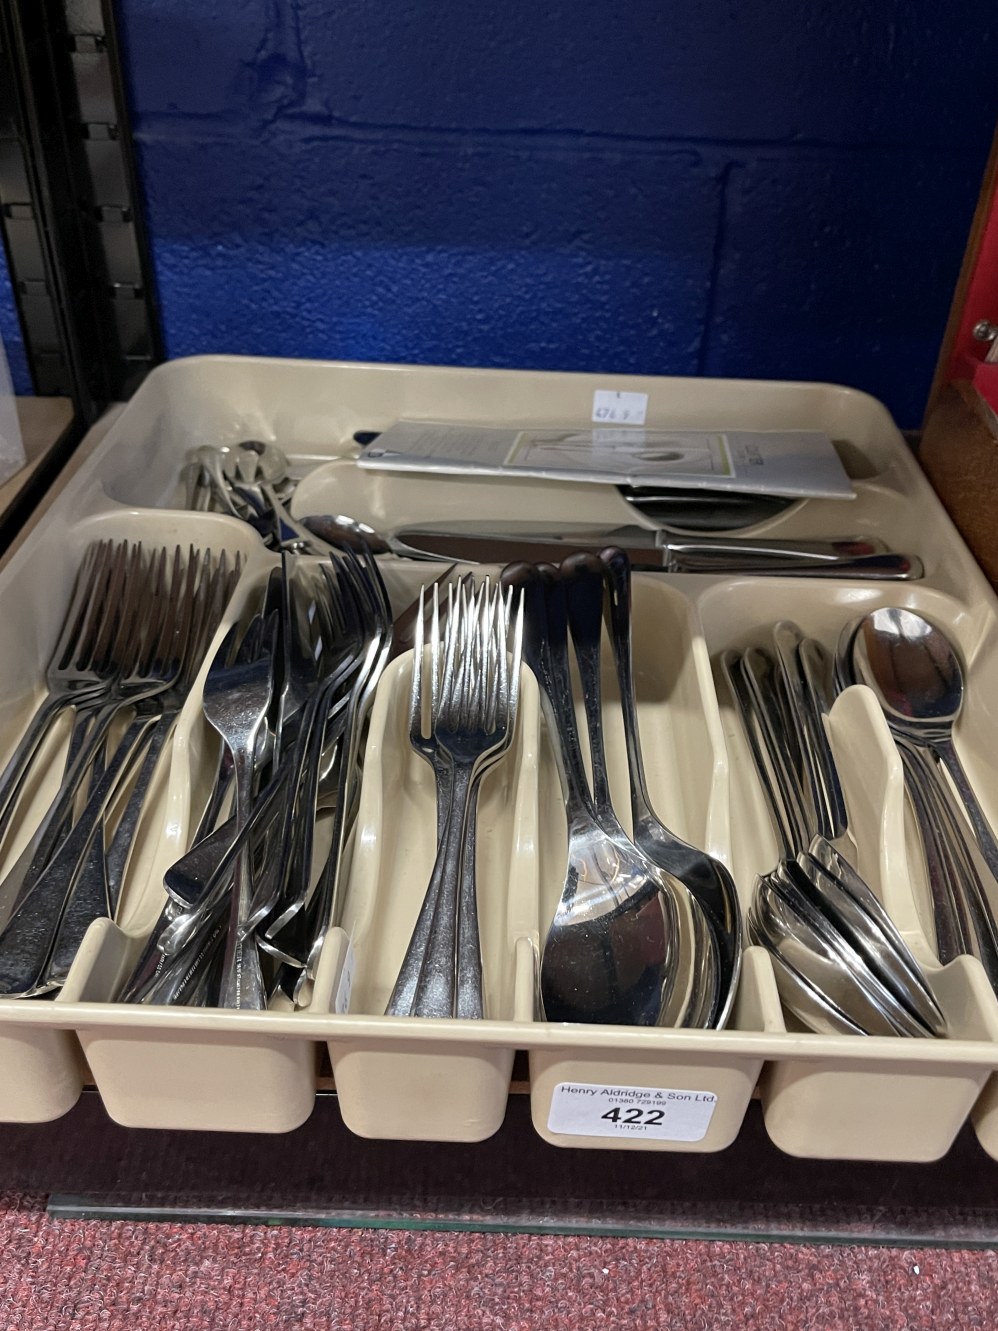 20th cent. Plated Robert Welch designed Courtier Premier flatware, dinner knives x 7, forks x 8,